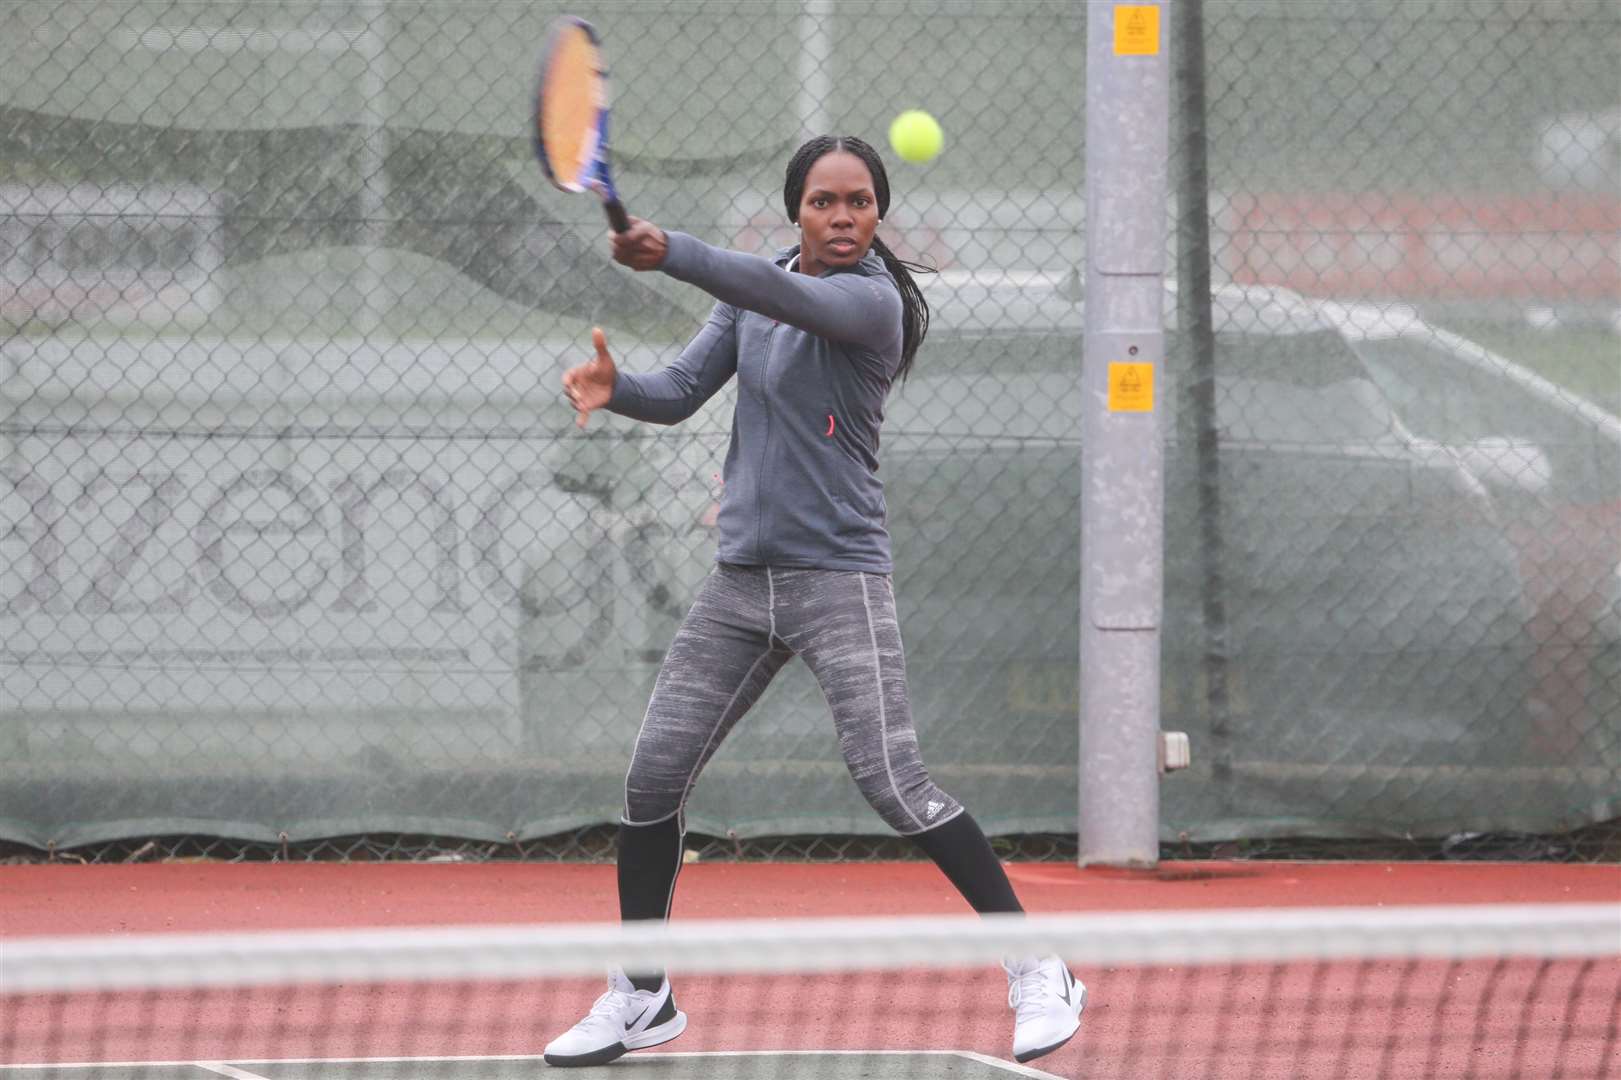 Club and committee member Izzy Eustache pictured playing at Gravesham Tennis Club earlier this month. Picture: Rob Powell